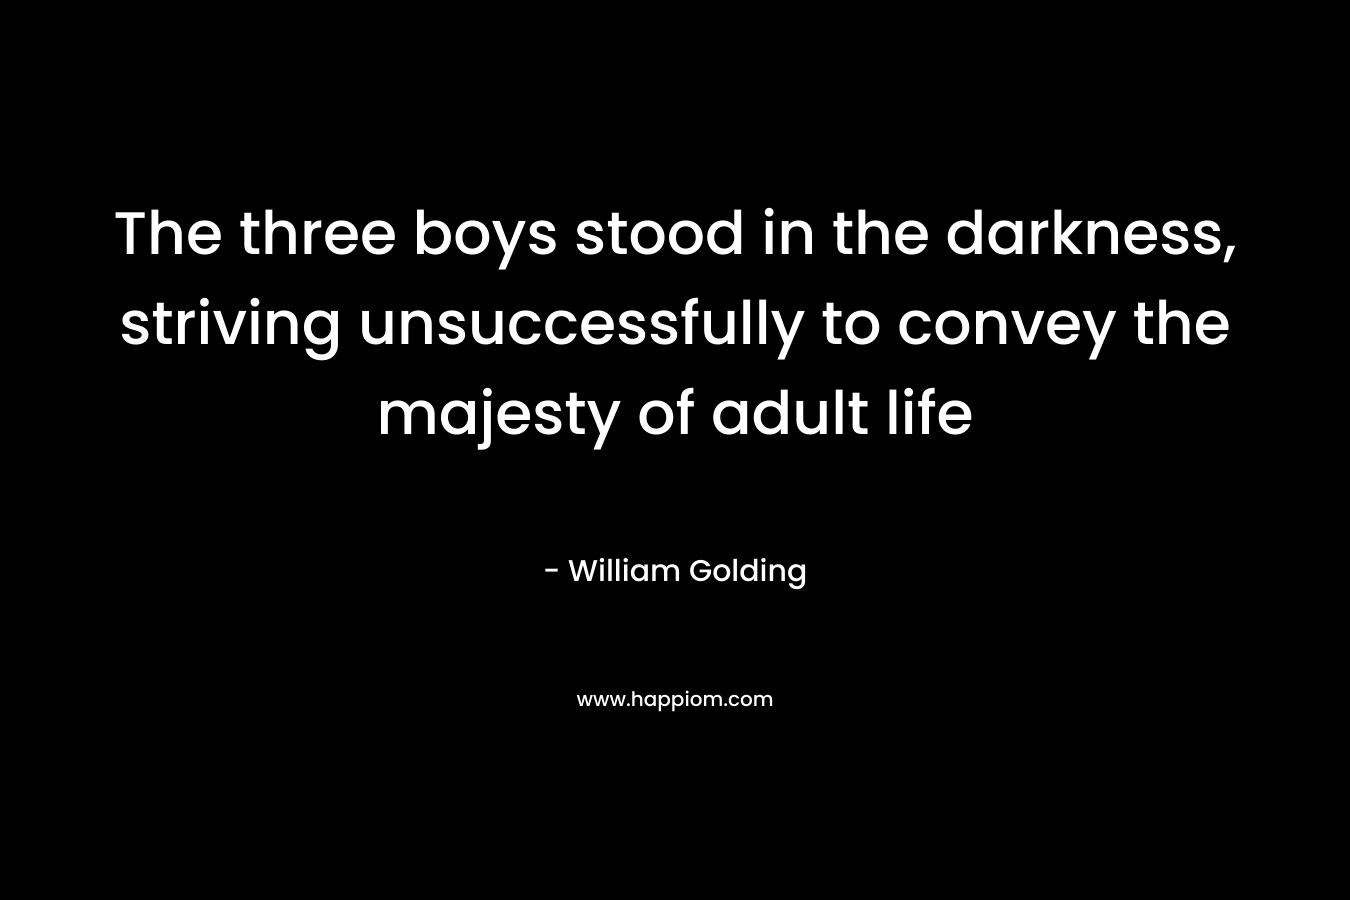 The three boys stood in the darkness, striving unsuccessfully to convey the majesty of adult life – William Golding